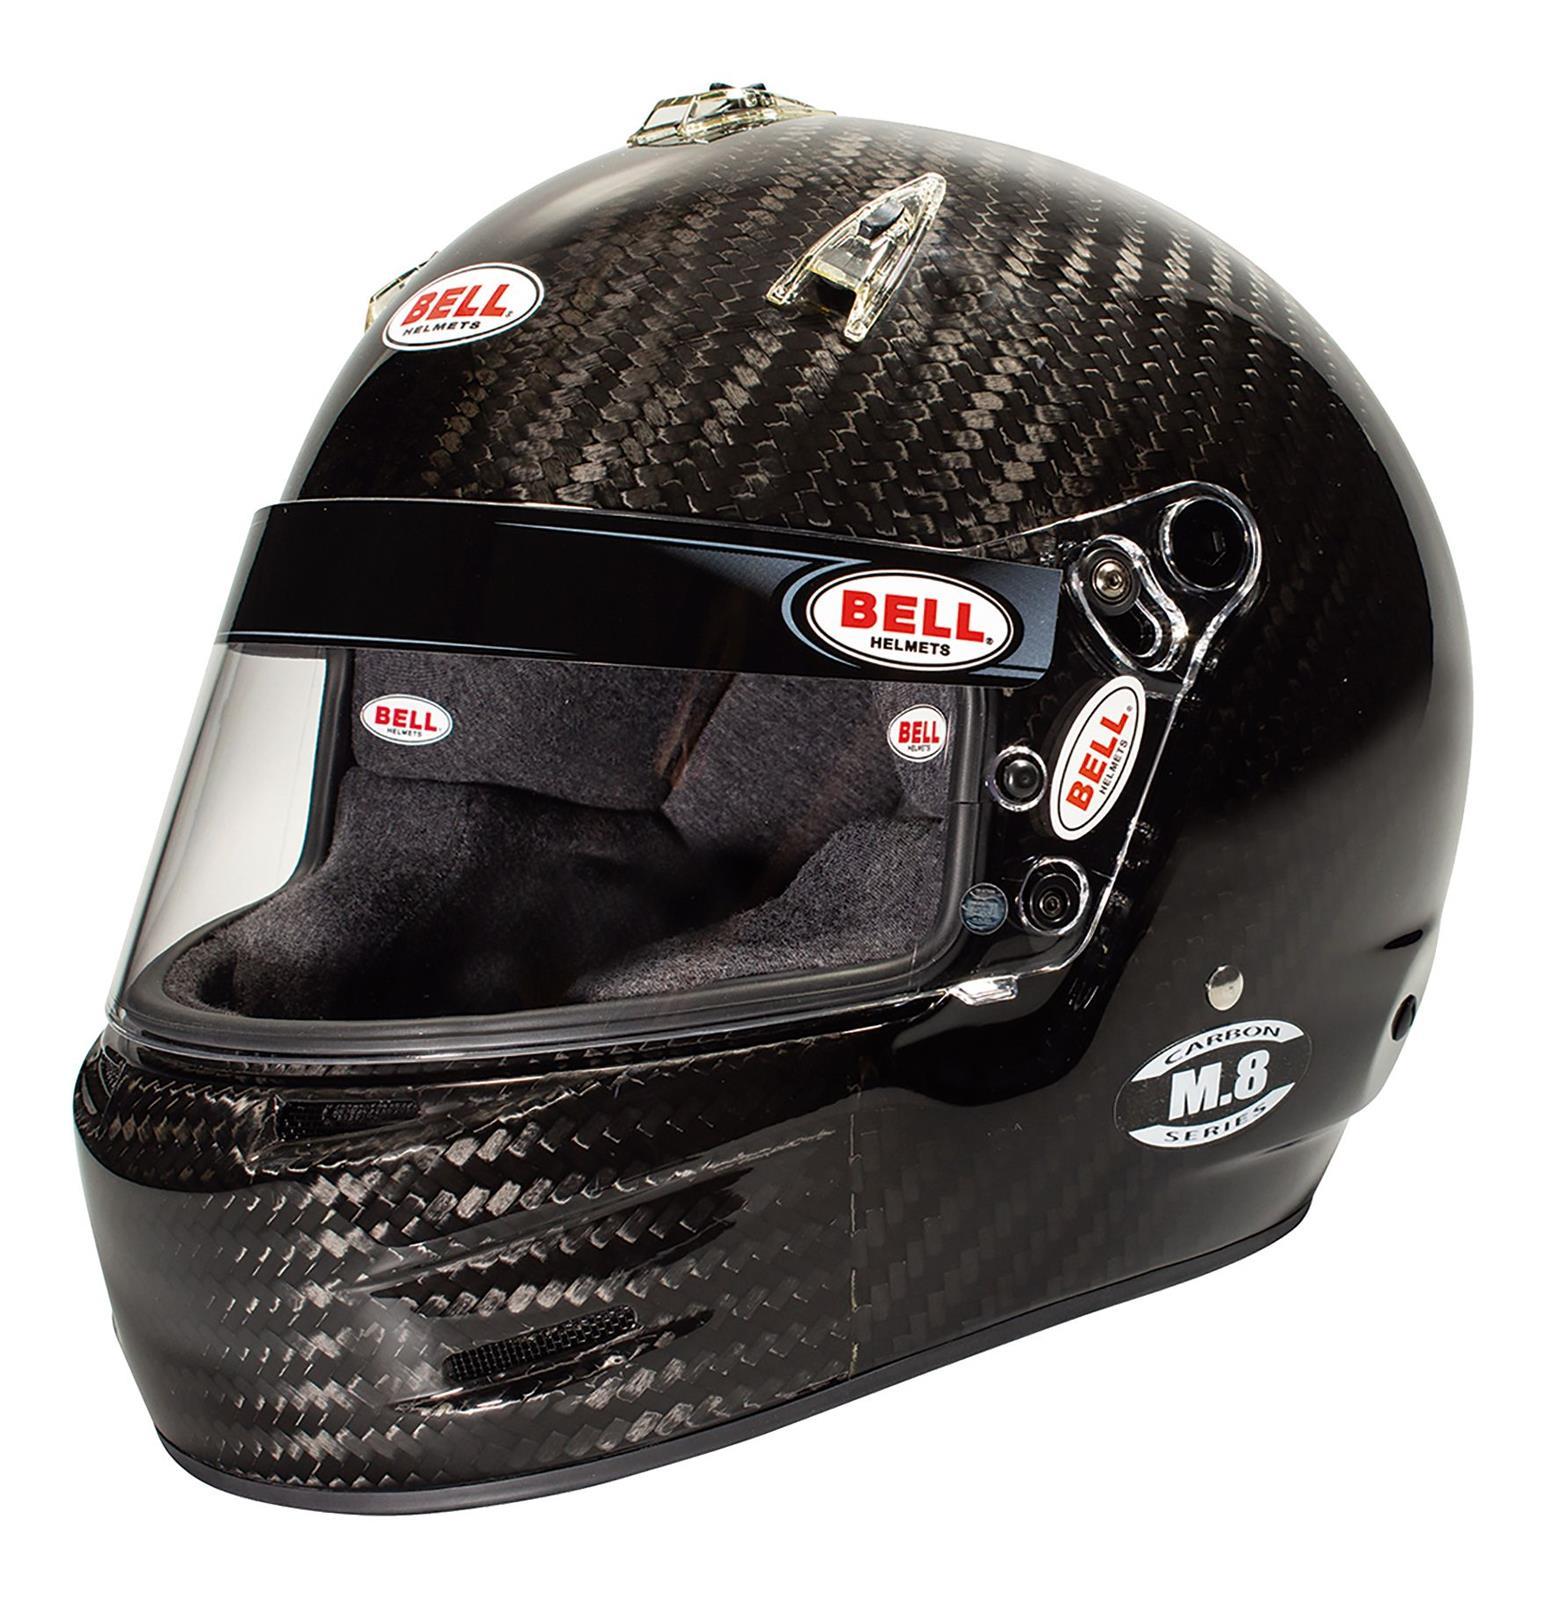 Bell Helmets 1208A01 Helmet, M8, Snell SA2020, FIA Approved, Head and Neck Support Ready, Carbon Fiber, Size 7-1/8, - Each